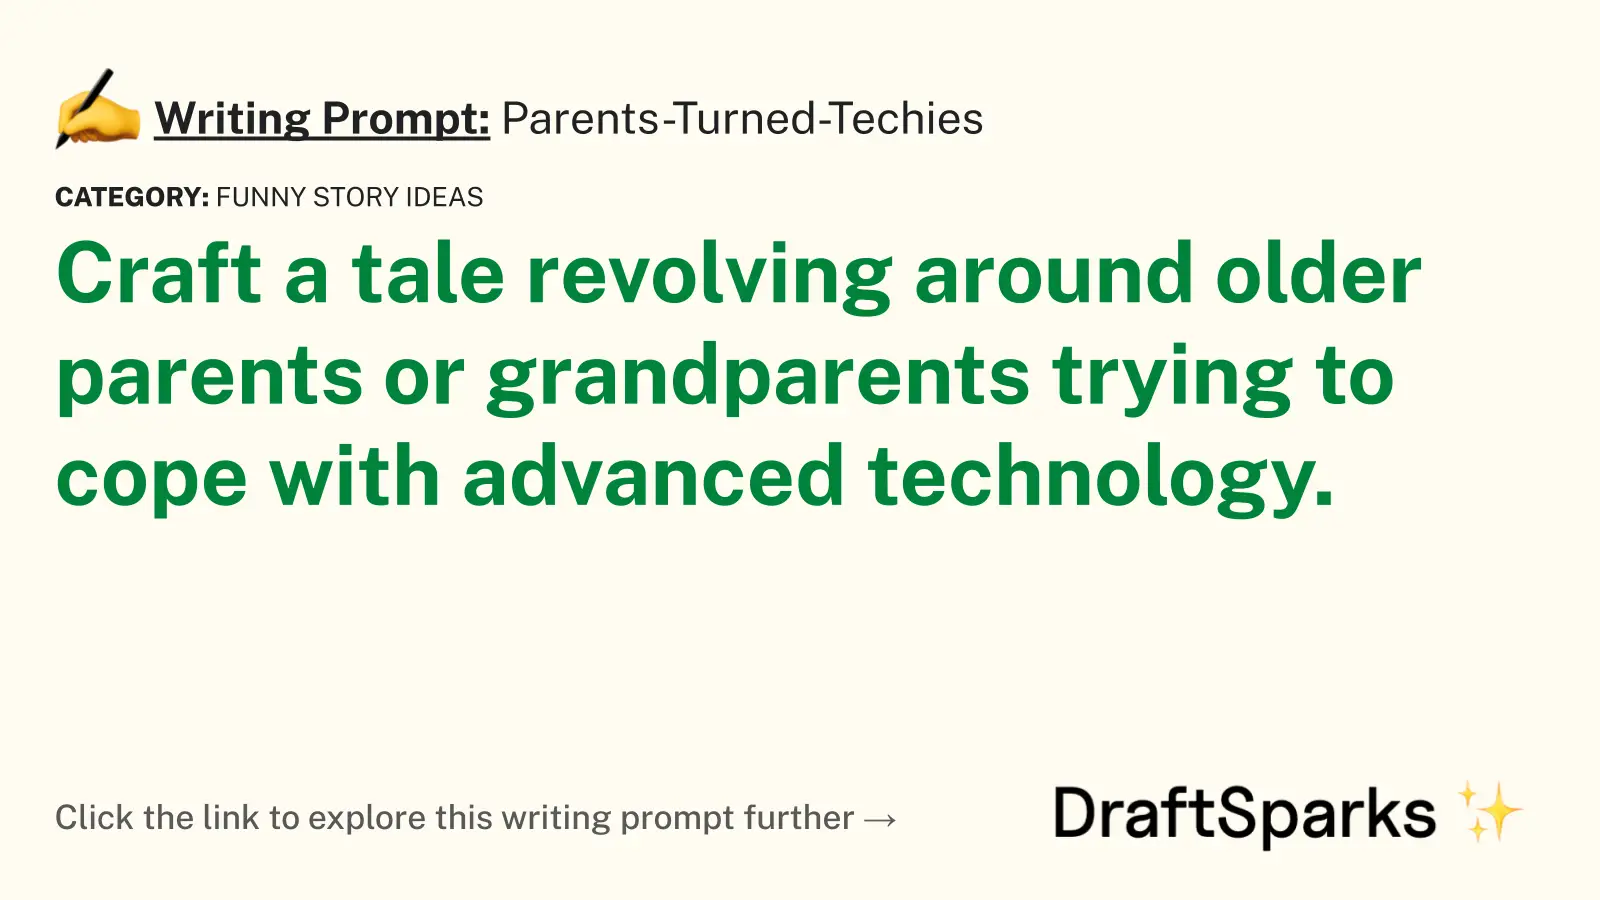 Parents-Turned-Techies